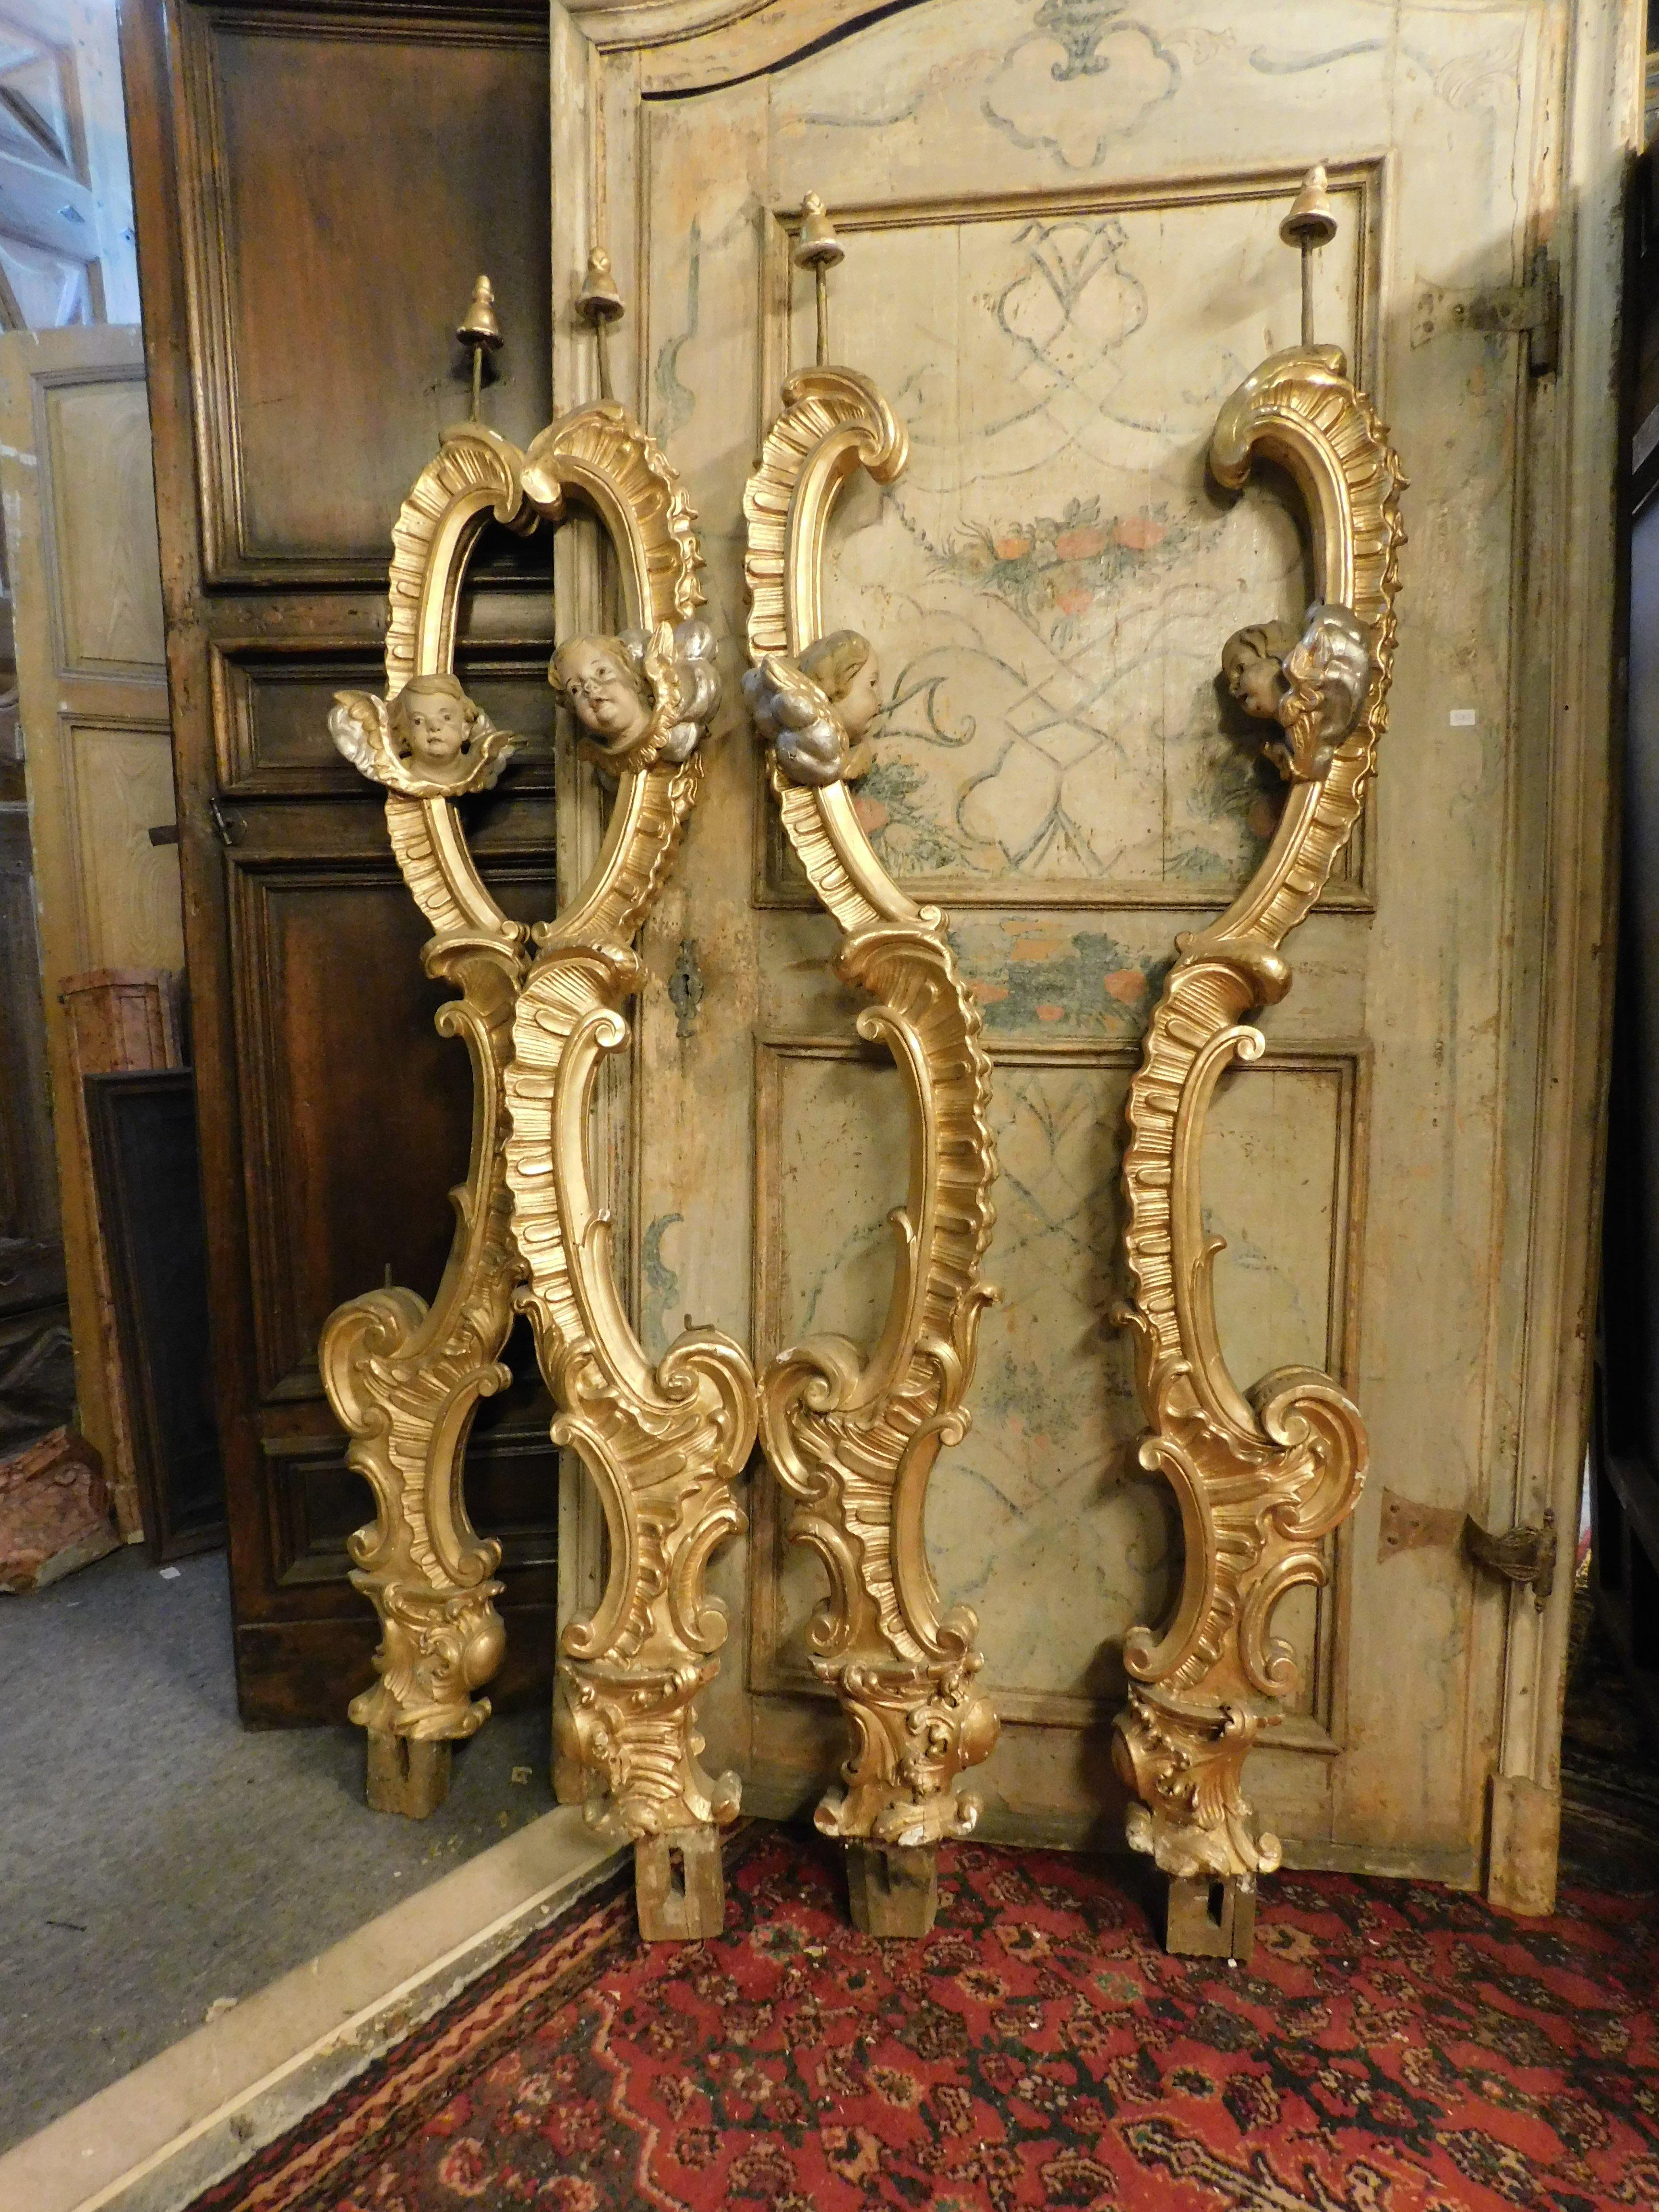 set of 4 ancient pilaster columns, richly hand-sculpted with painted and gilded cherubs, with canopy attachment, probably coming from a church in Italy from the 18th century.
Original and beautiful historical artefacts of high antiques, incredible